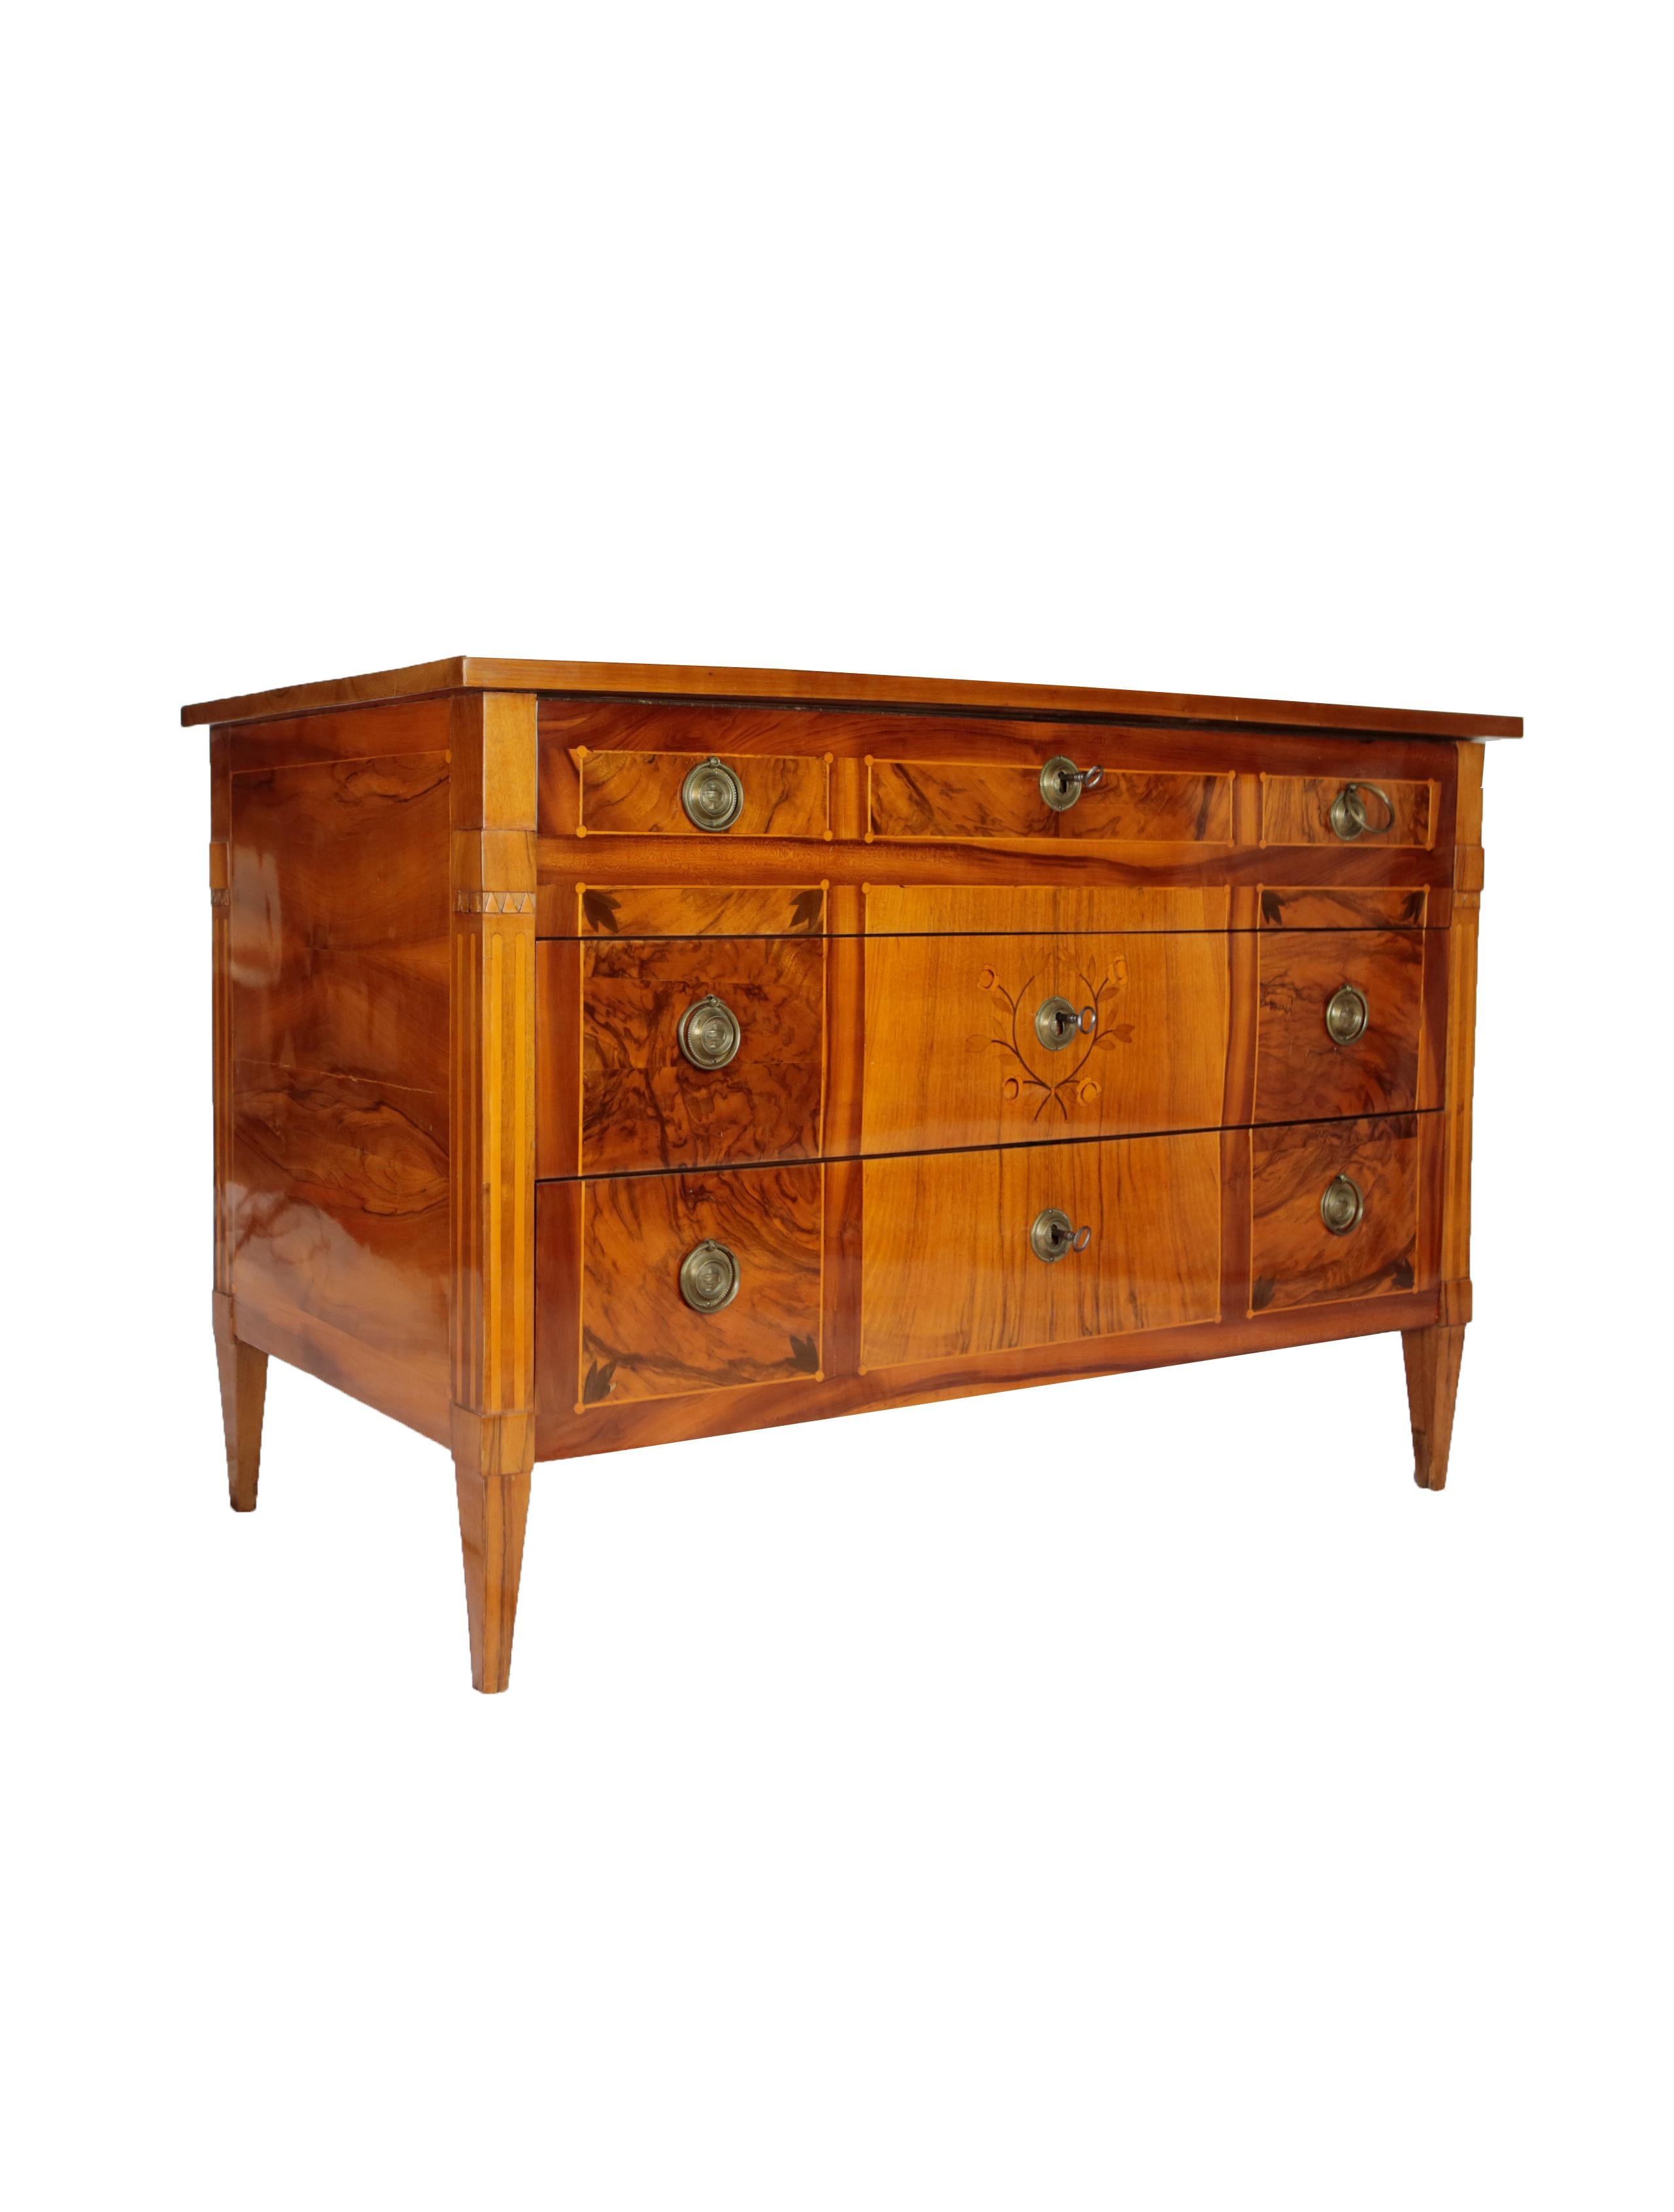 Beautiful straight-lined Louis Seize chest of drawers, worked in Germany, Westphalia circa 1780, veneered with walnut, walnut root, plum and other precious woods and marketed. 
Original fittings, 3 drawers with different sizes, restored condition,